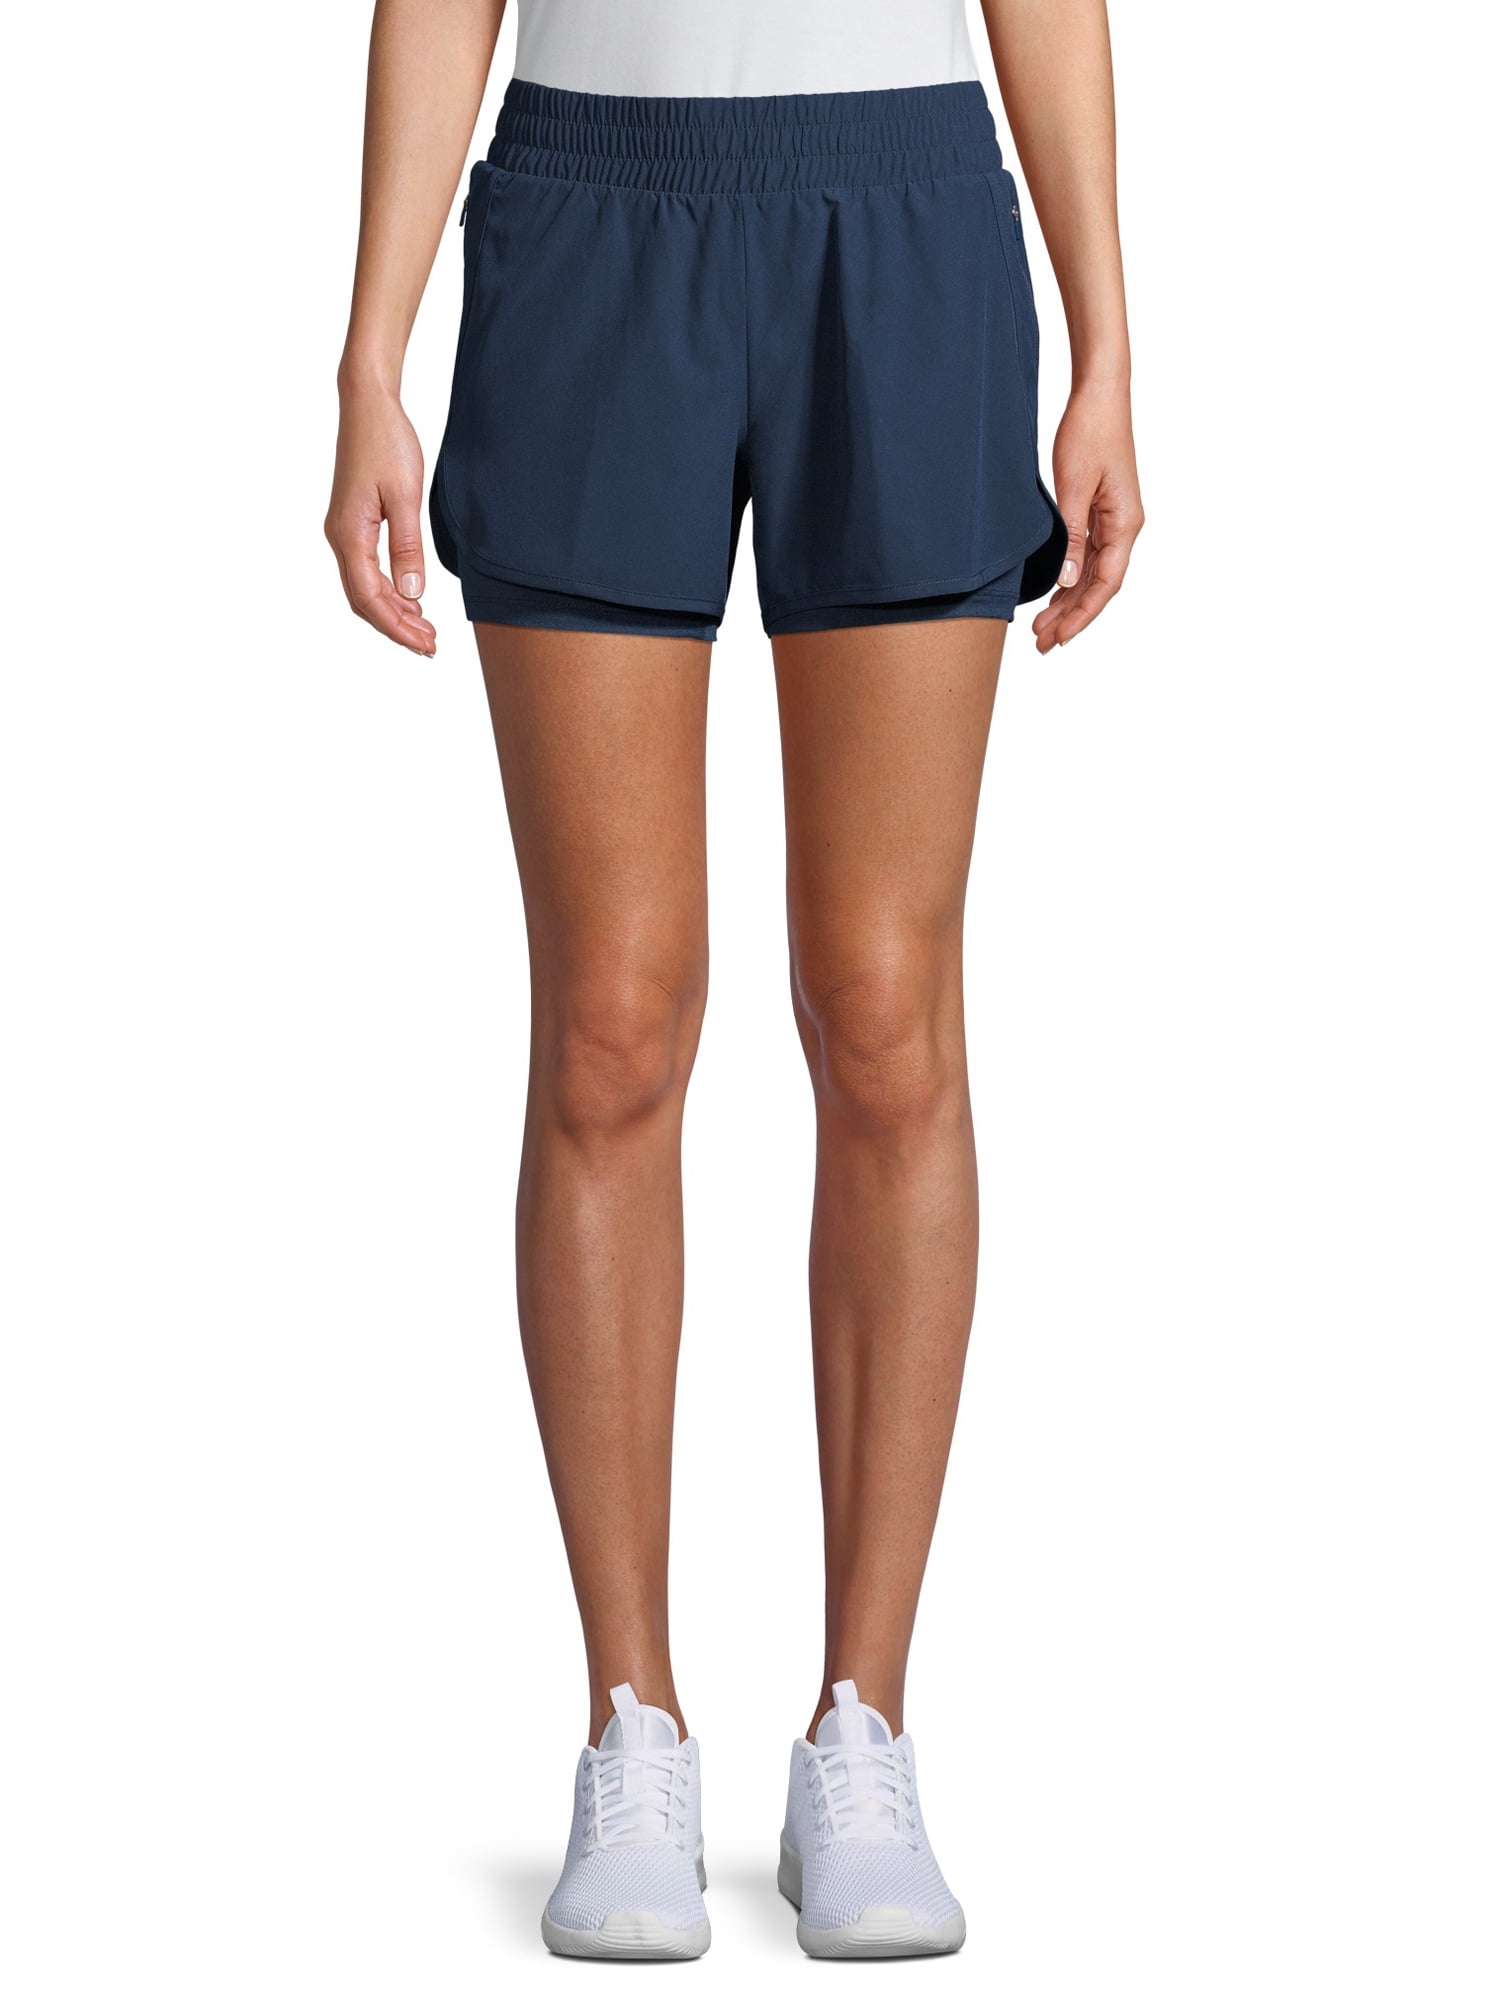 athletic shorts with spandex underneath